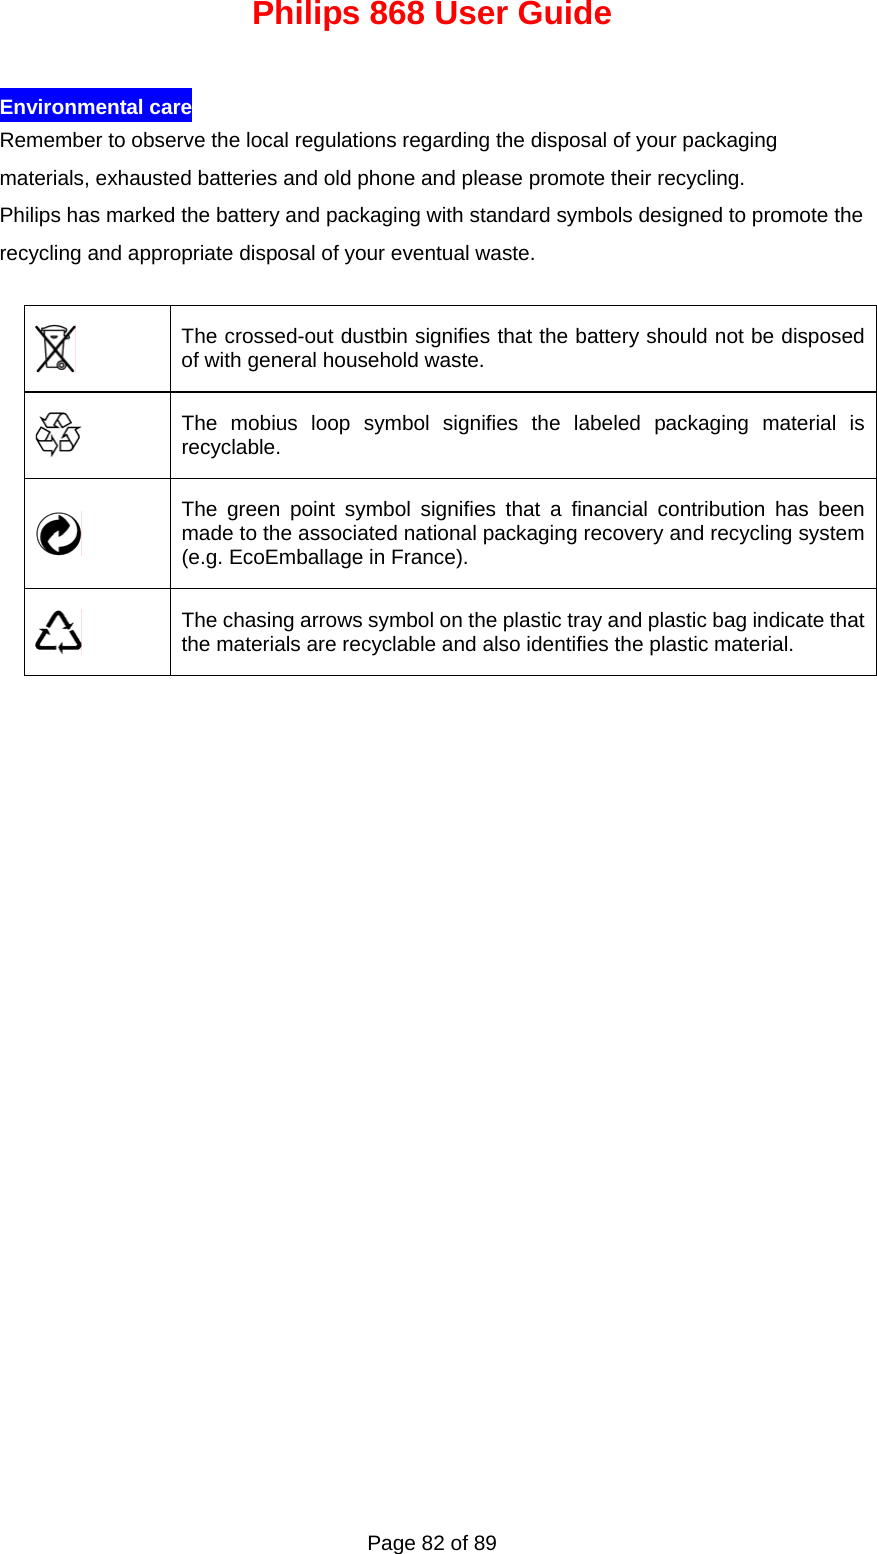 Philips 868 User Guide Page 82 of 89  Environmental care Remember to observe the local regulations regarding the disposal of your packaging materials, exhausted batteries and old phone and please promote their recycling. Philips has marked the battery and packaging with standard symbols designed to promote the recycling and appropriate disposal of your eventual waste.   The crossed-out dustbin signifies that the battery should not be disposed of with general household waste.  The mobius loop symbol signifies the labeled packaging material is recyclable.  The green point symbol signifies that a financial contribution has been made to the associated national packaging recovery and recycling system (e.g. EcoEmballage in France).  The chasing arrows symbol on the plastic tray and plastic bag indicate that the materials are recyclable and also identifies the plastic material.  